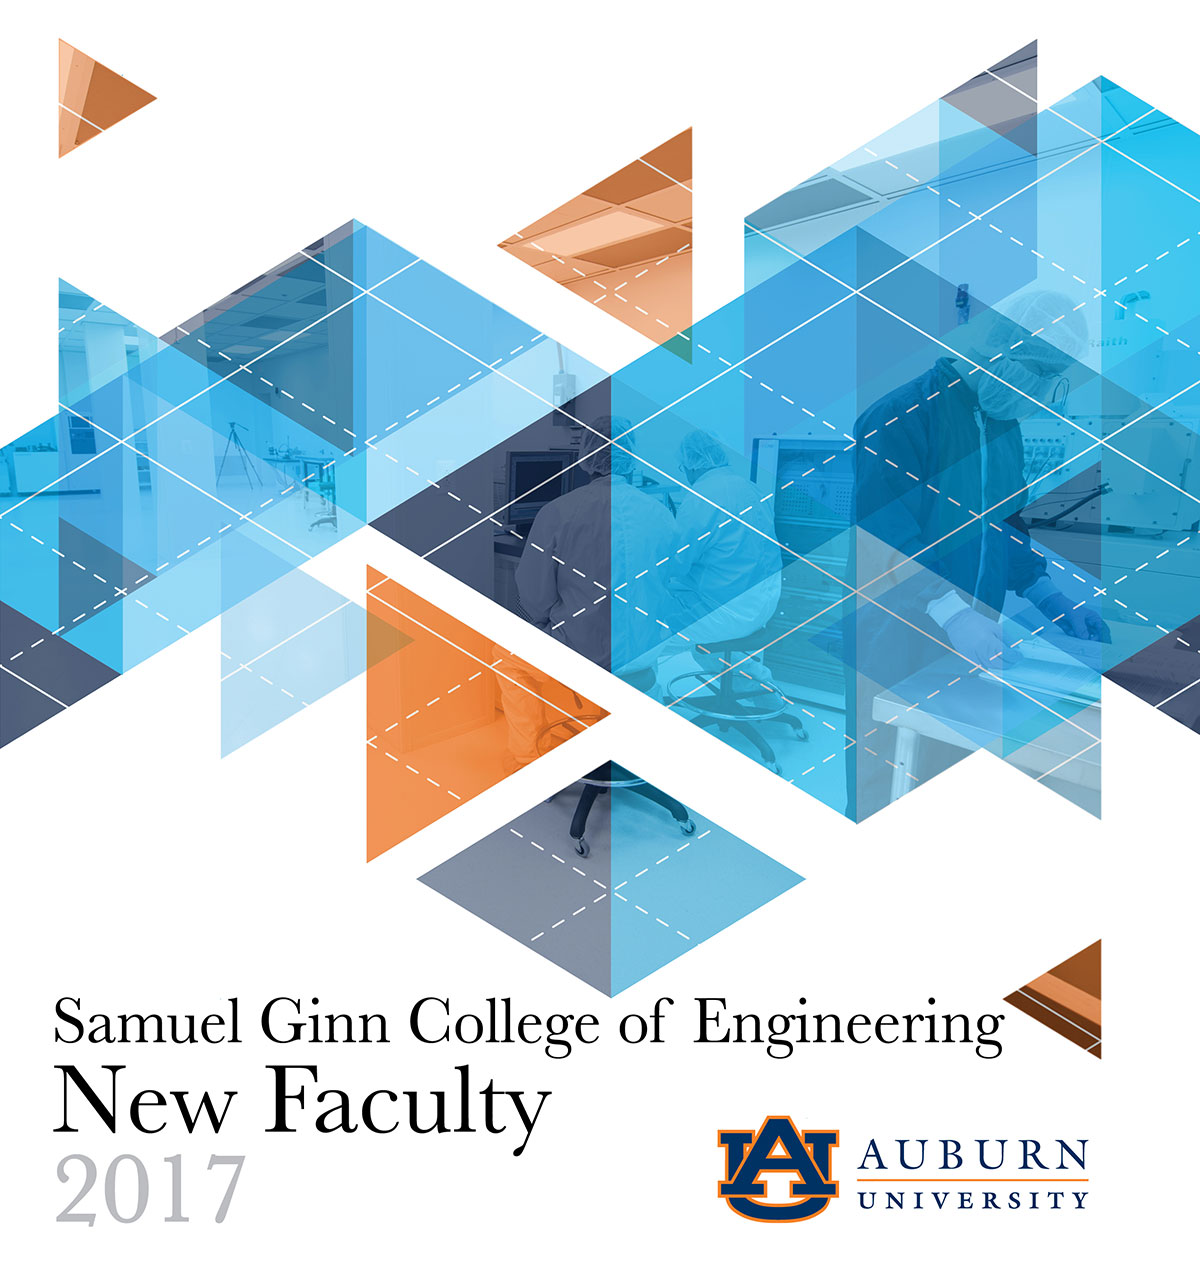 Samuel Ginn College of Engineering New Faculty 2017